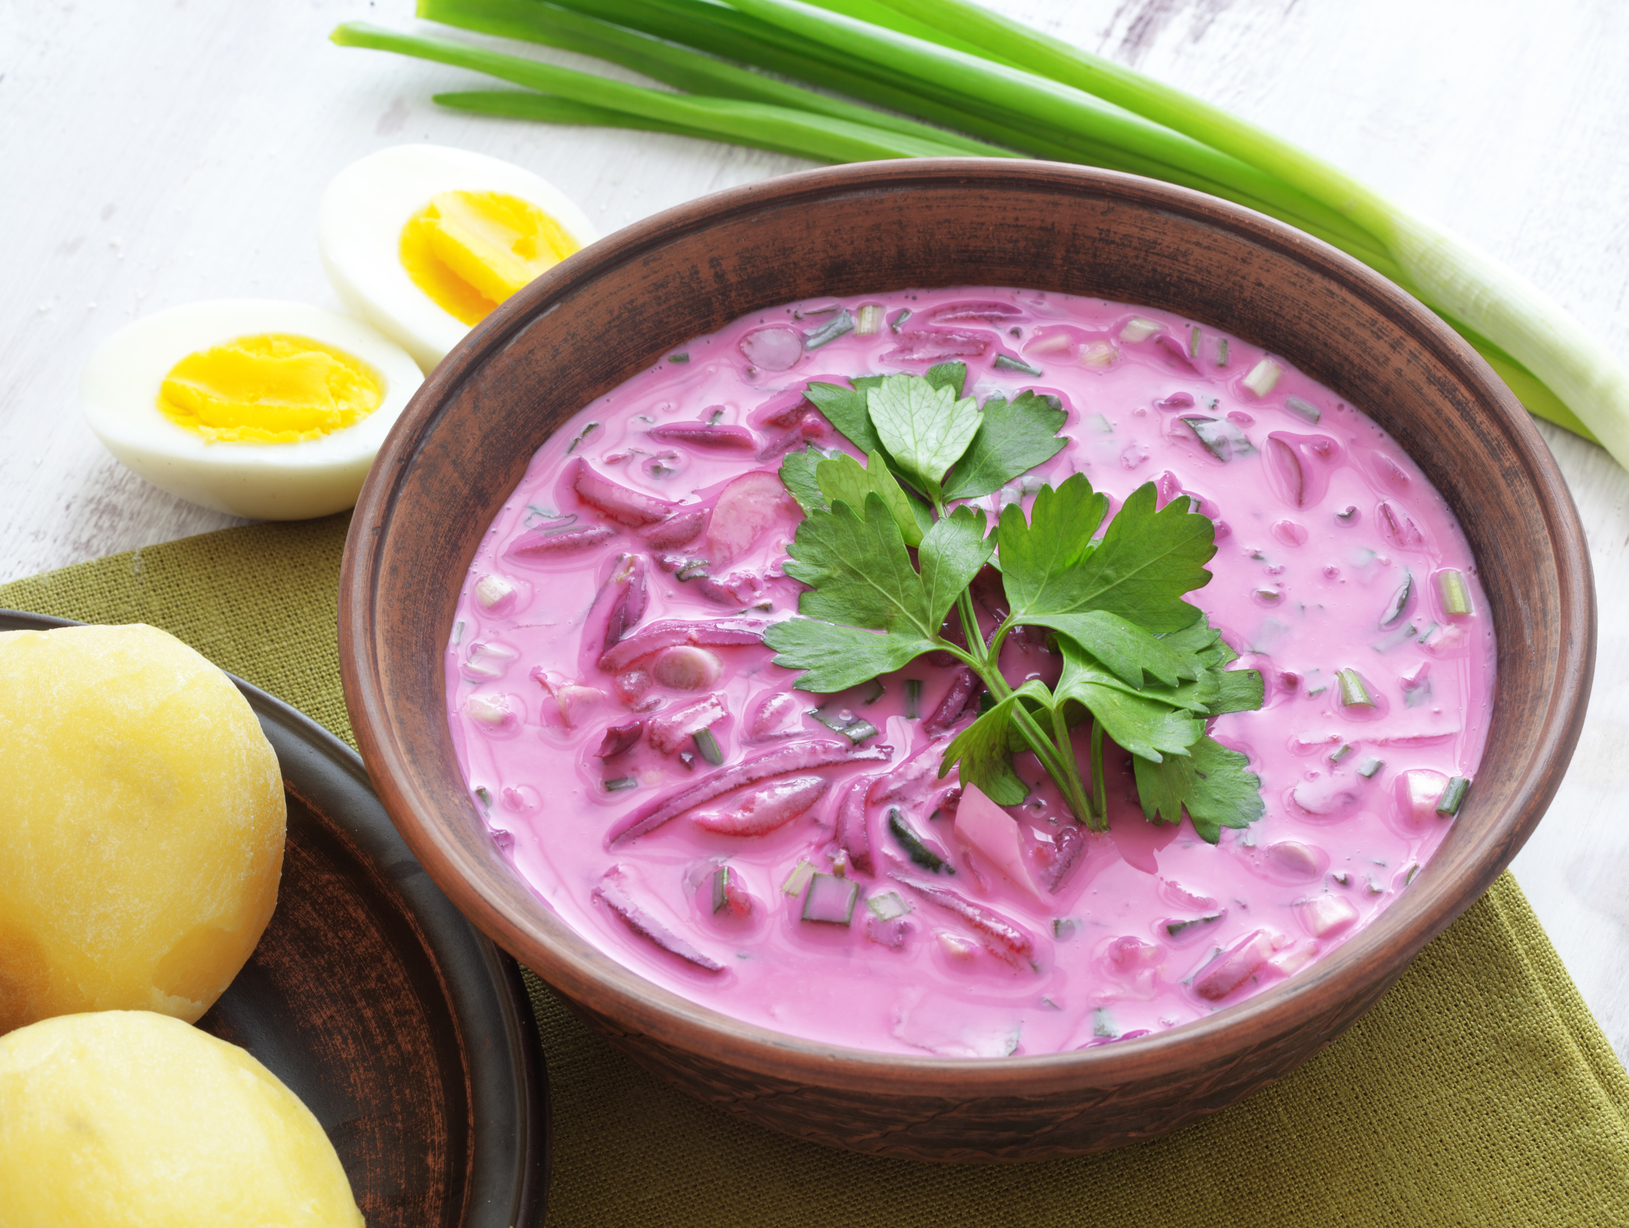 Traditional cold beet soup with vegetables